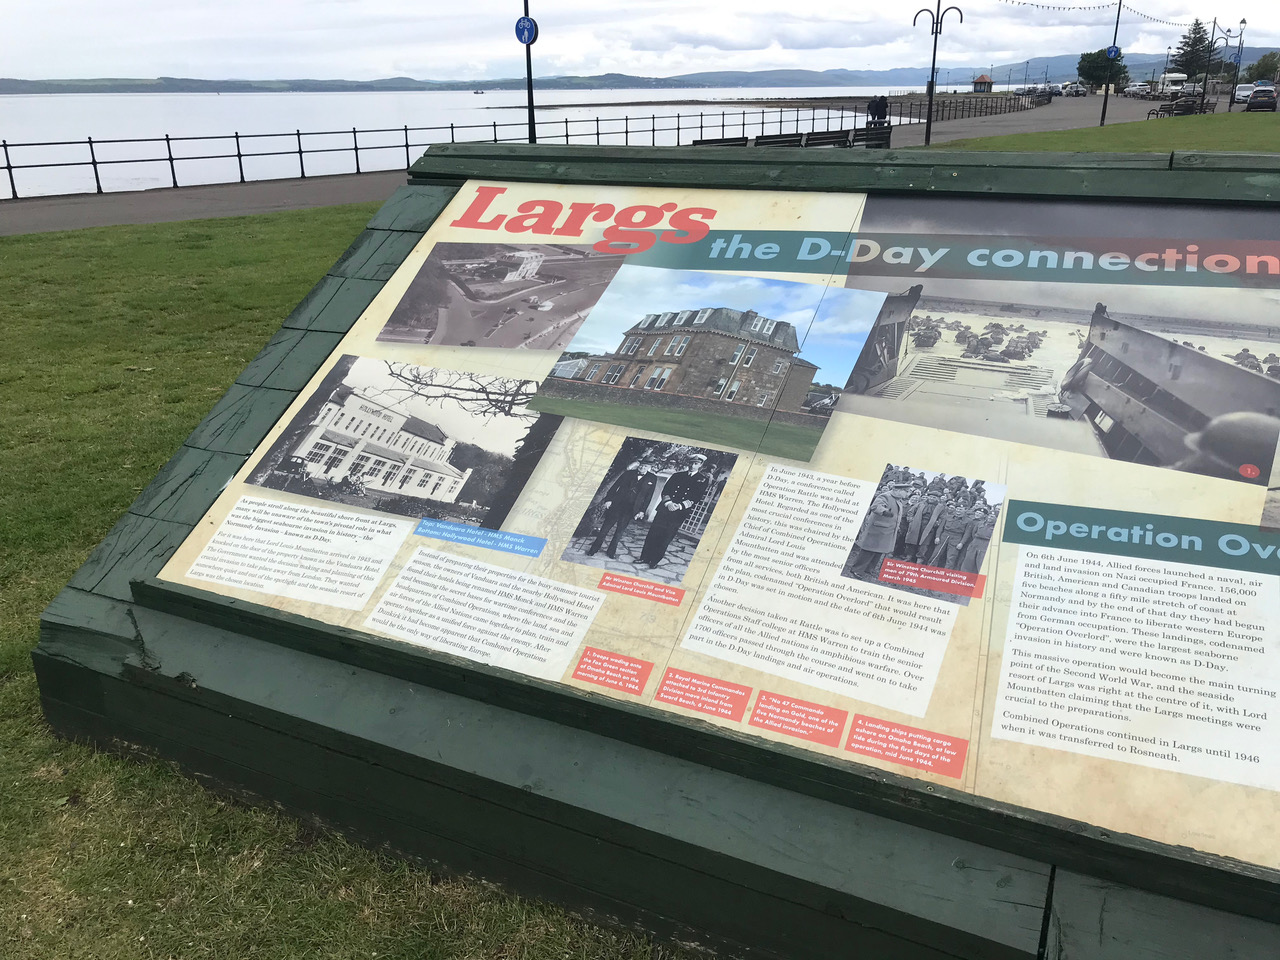 Close-up of panel installation for Largs D-Day Connection